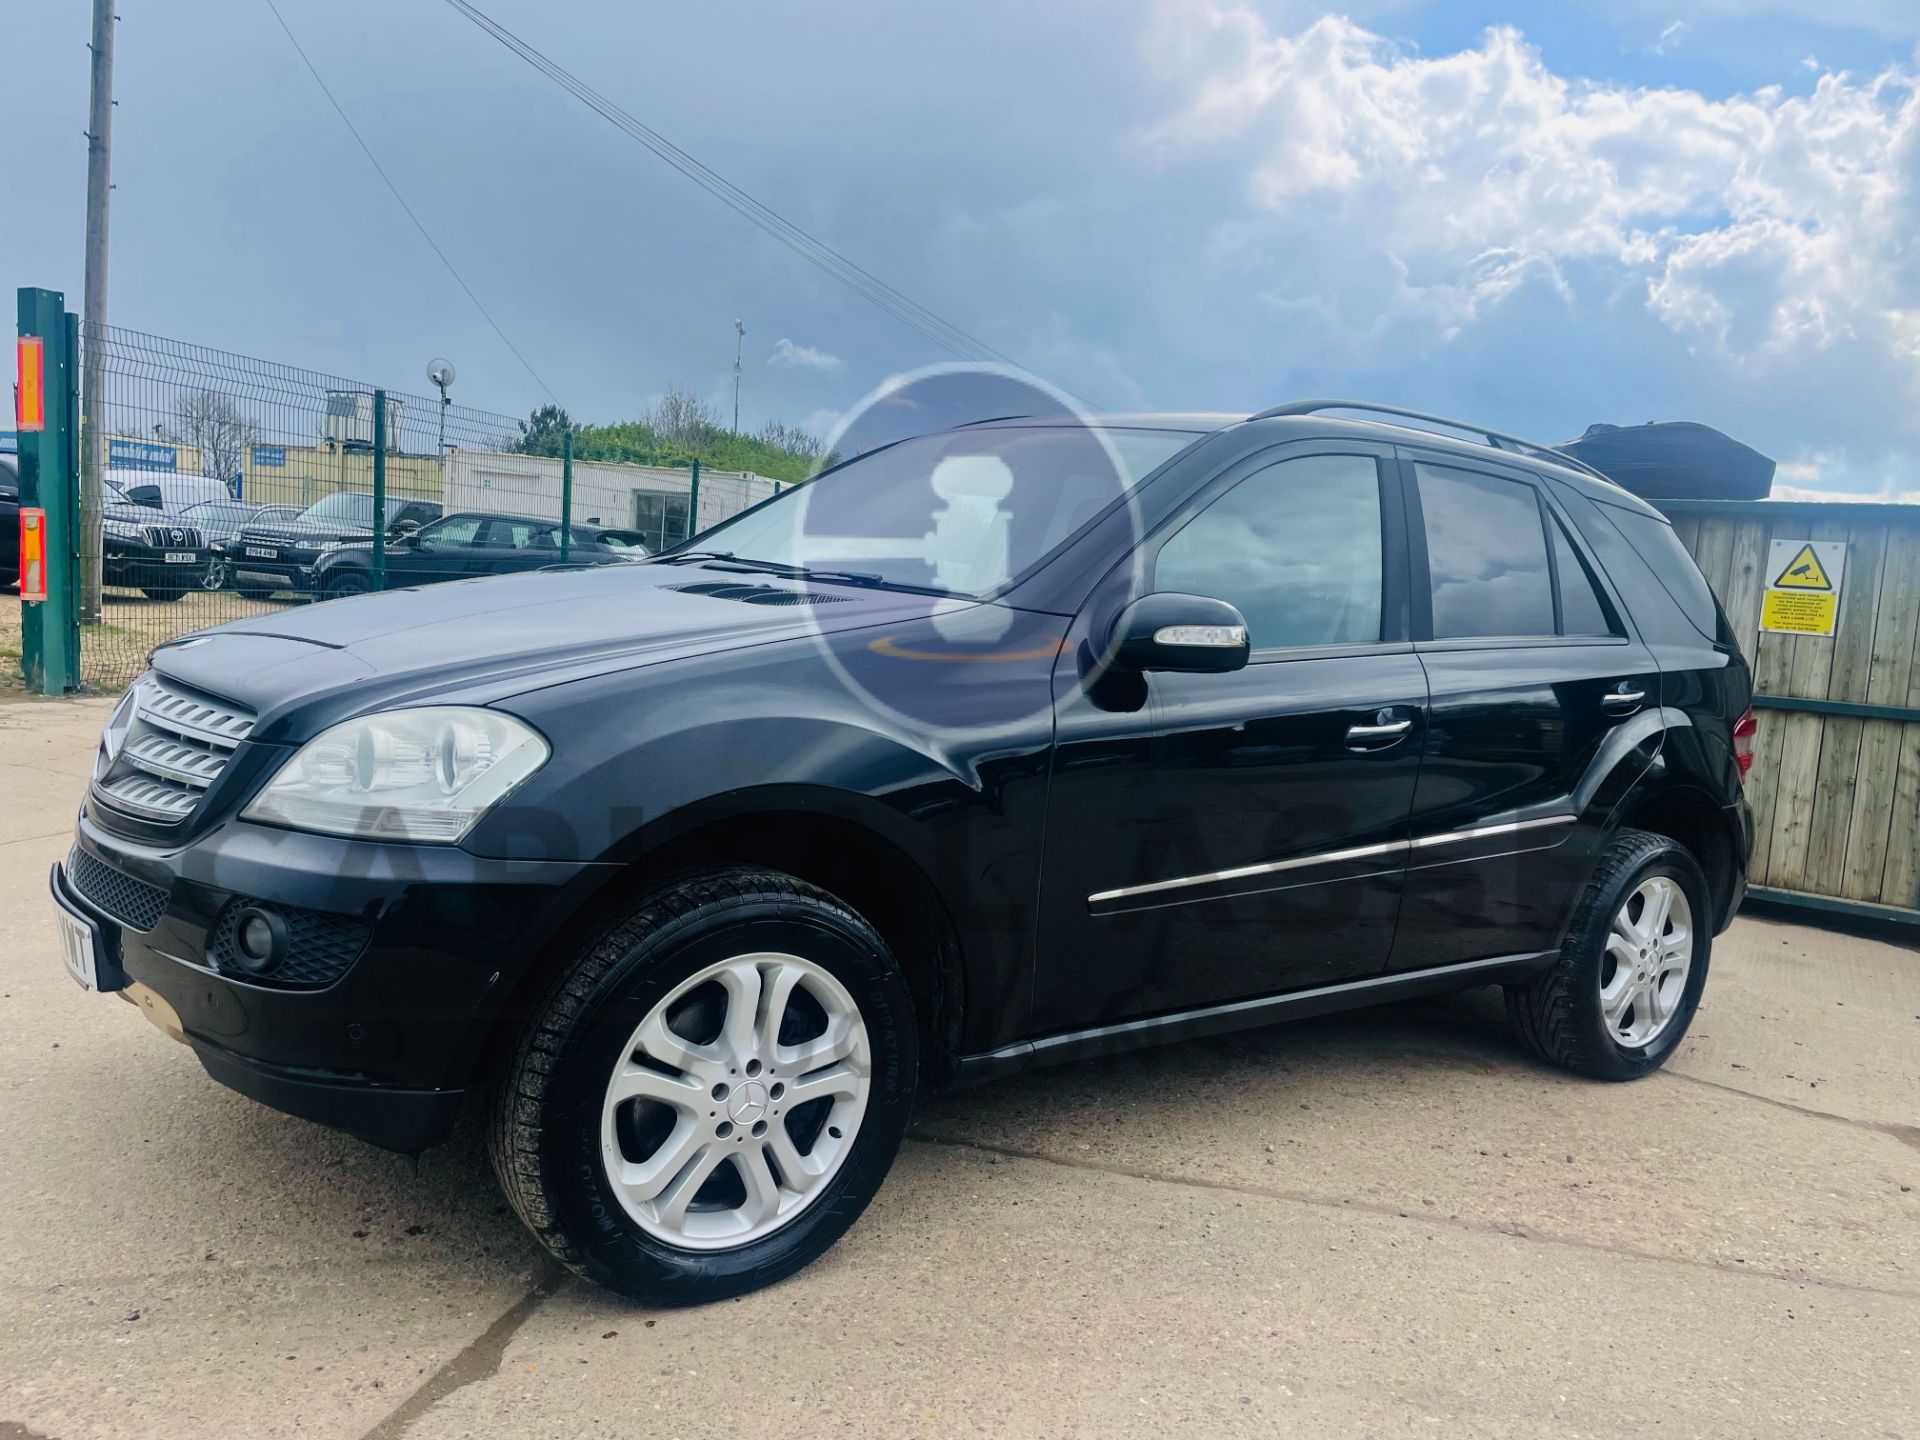 ON SALE MERCEDES-BENZ ML 320 CDI *SE EDITION* SUV (2007 MODEL) '3.0 DIESEL - AUTOMATIC' *LEATHER - Image 7 of 49